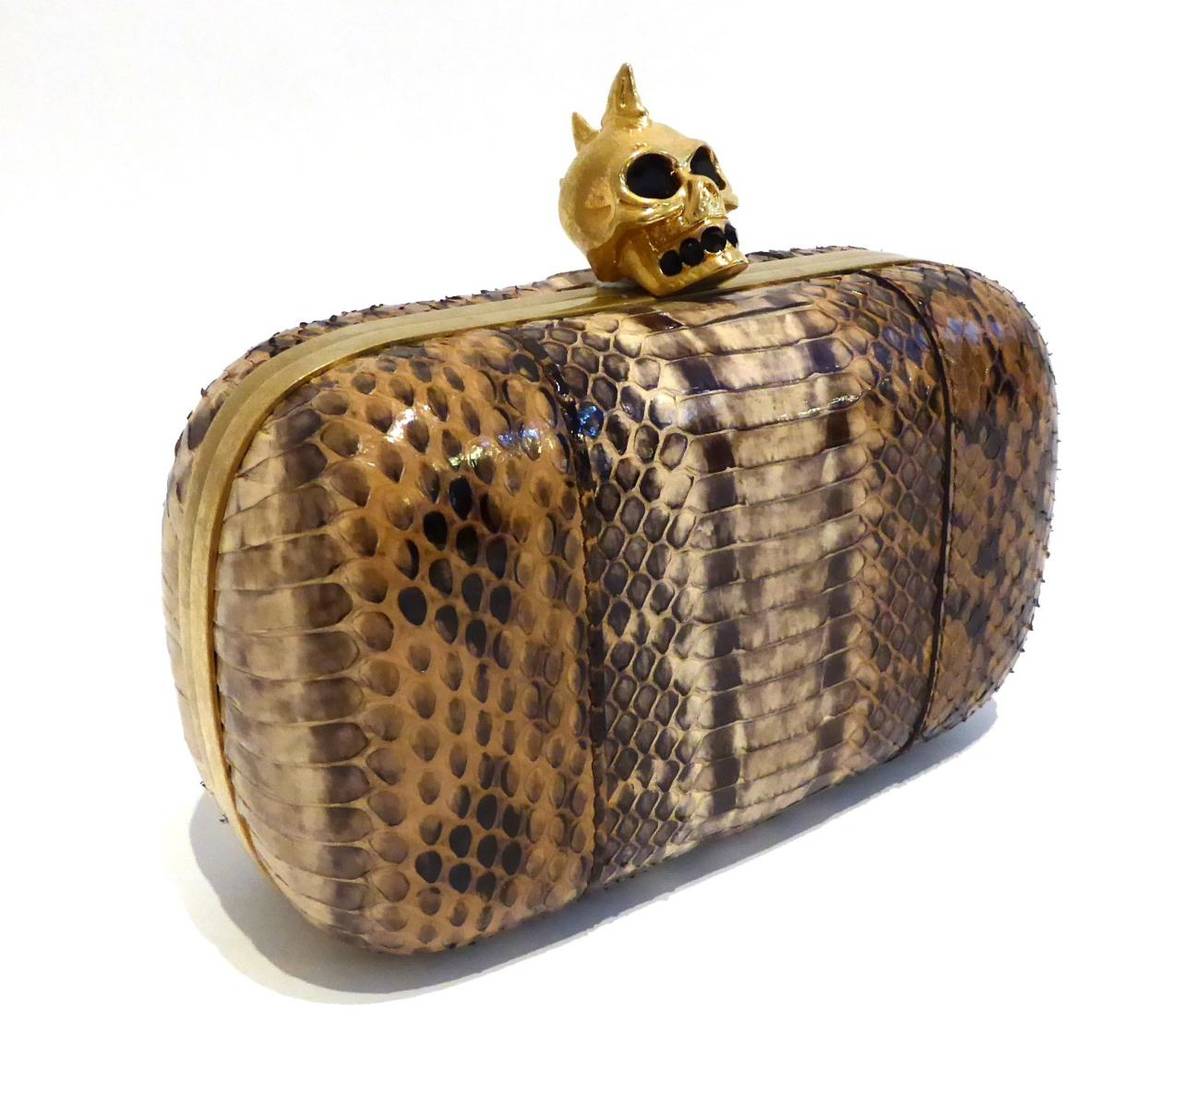 Lot 2151 - Alexander McQueen 'Classic Skull Clutch', hard clutch bag in brown, cream and black snakeskin, with